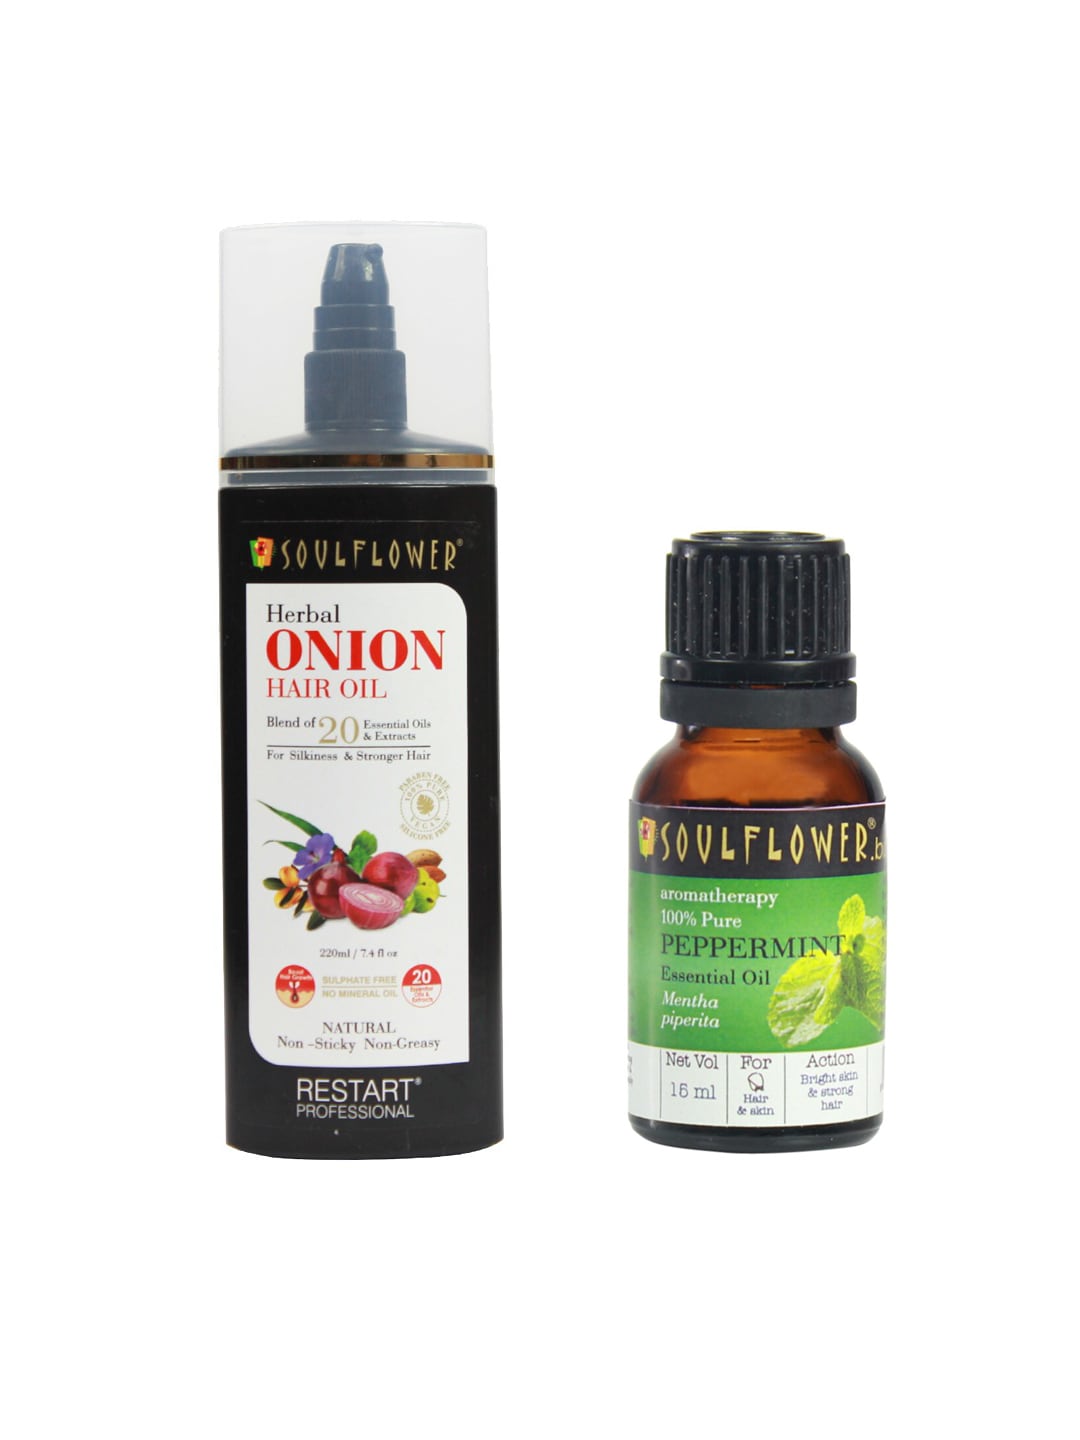 Soulflower Unisex Set of 2 Sustainable Onion Hair Growth Oil 220ml & Peppermint Essential Oil 15ml Price in India